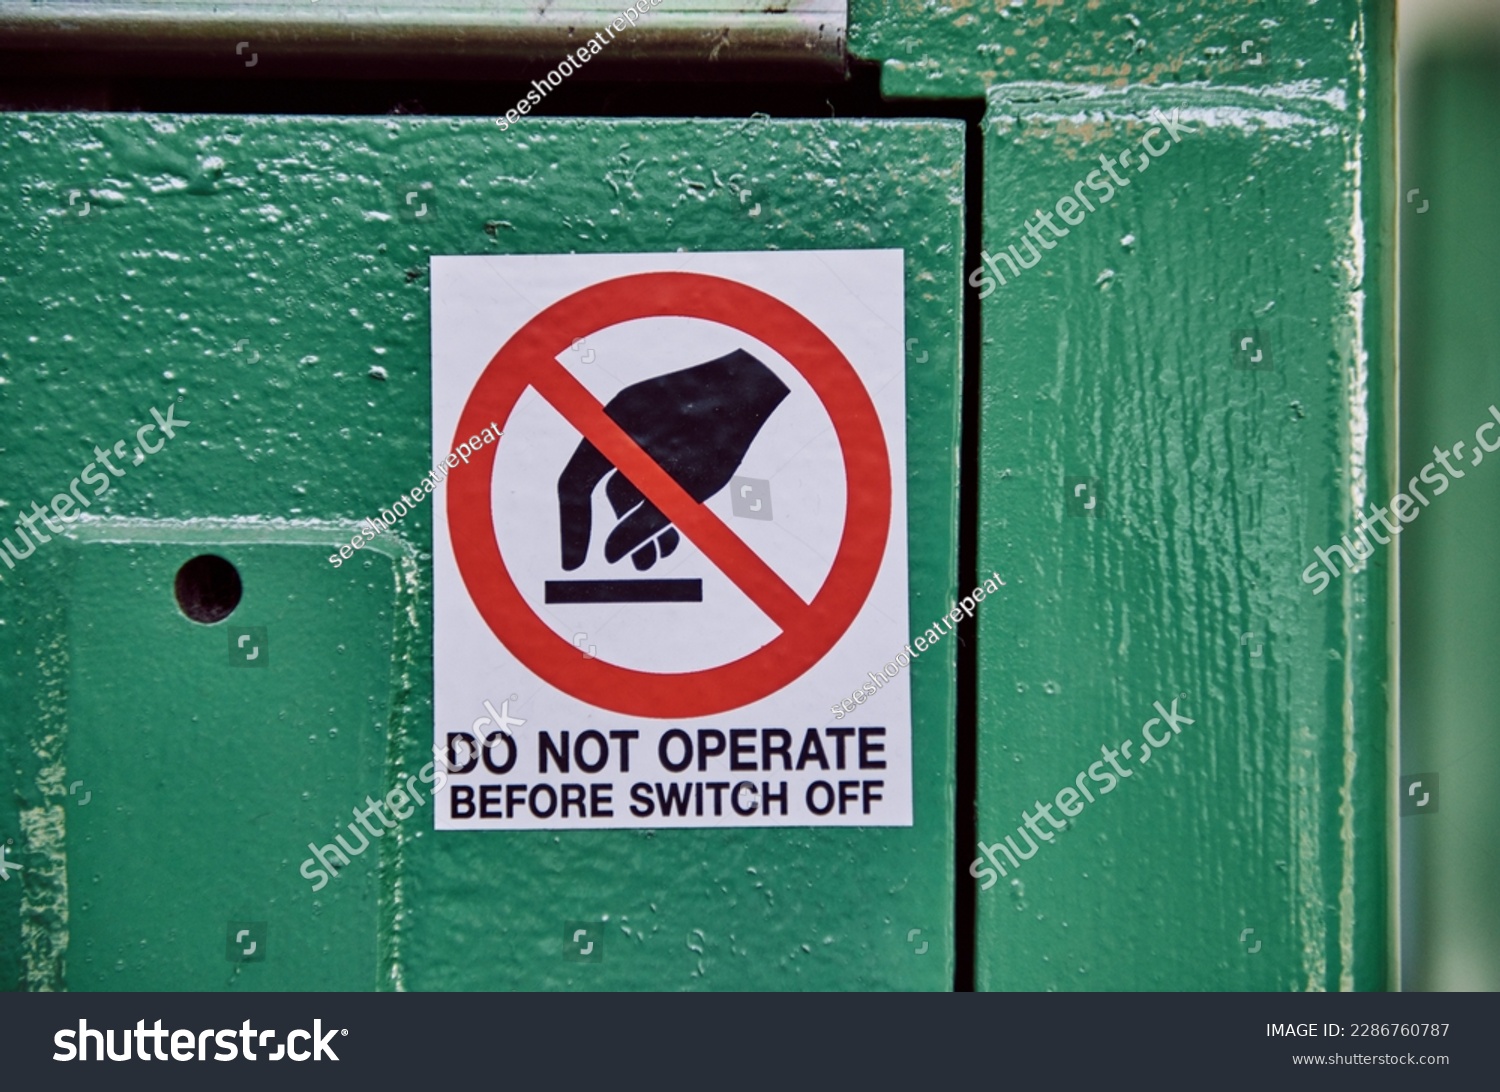 Do not operate health and safety sign to deny personal with no access clearance. Off limits in an industrial factory. danger ahead, health and safety hazard warning. #2286760787